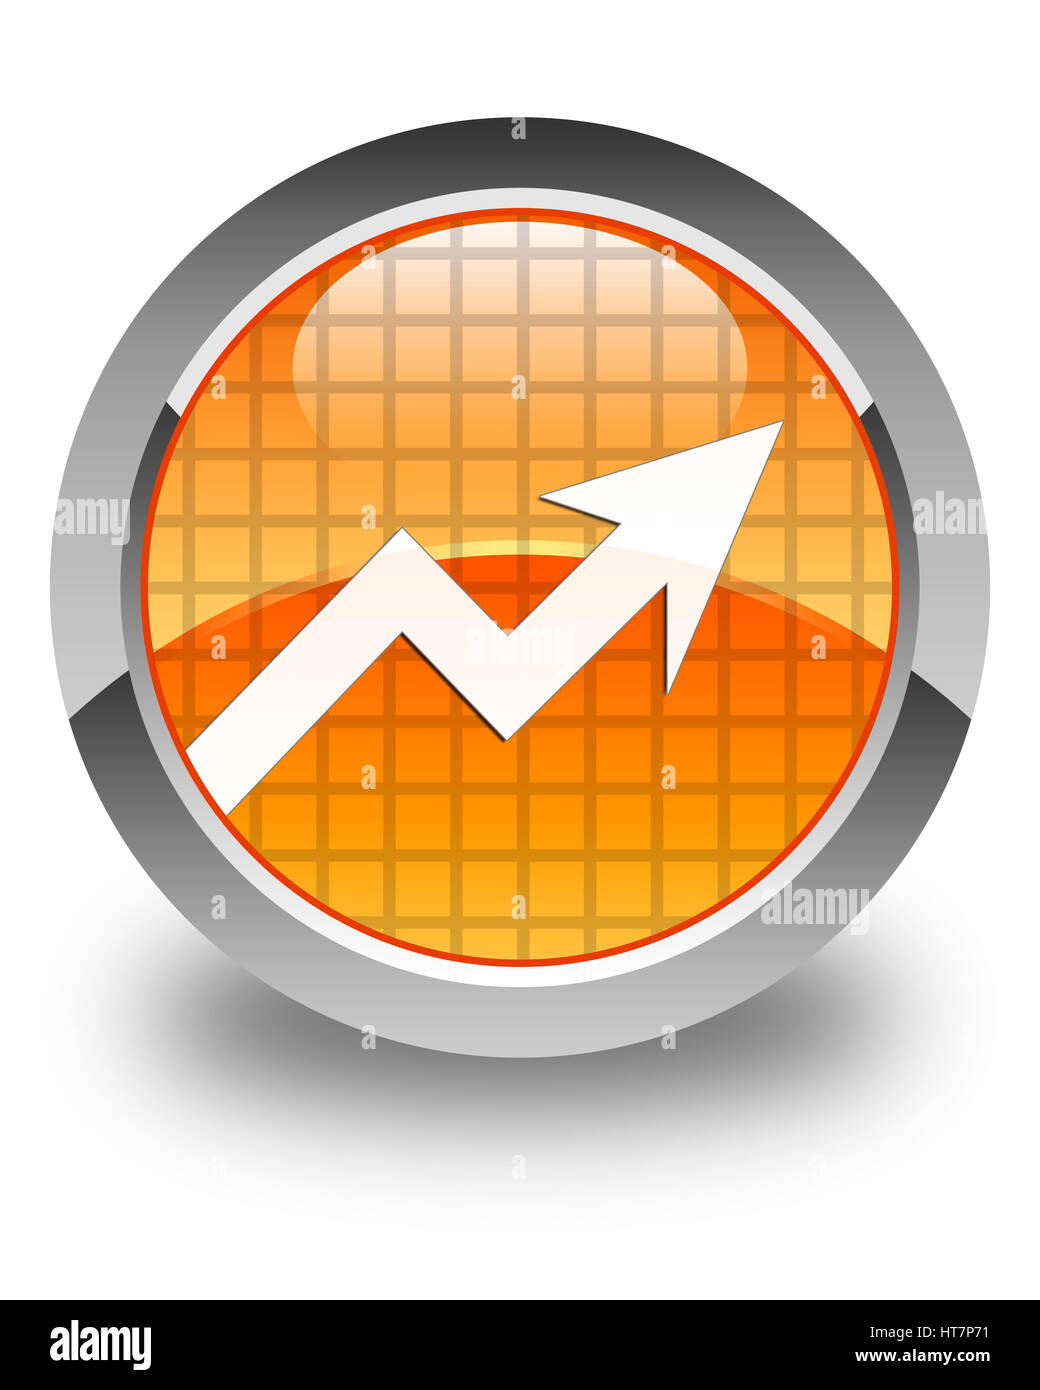 Business graph icon isolated on glossy orange round button abstract illustration Stock Photo